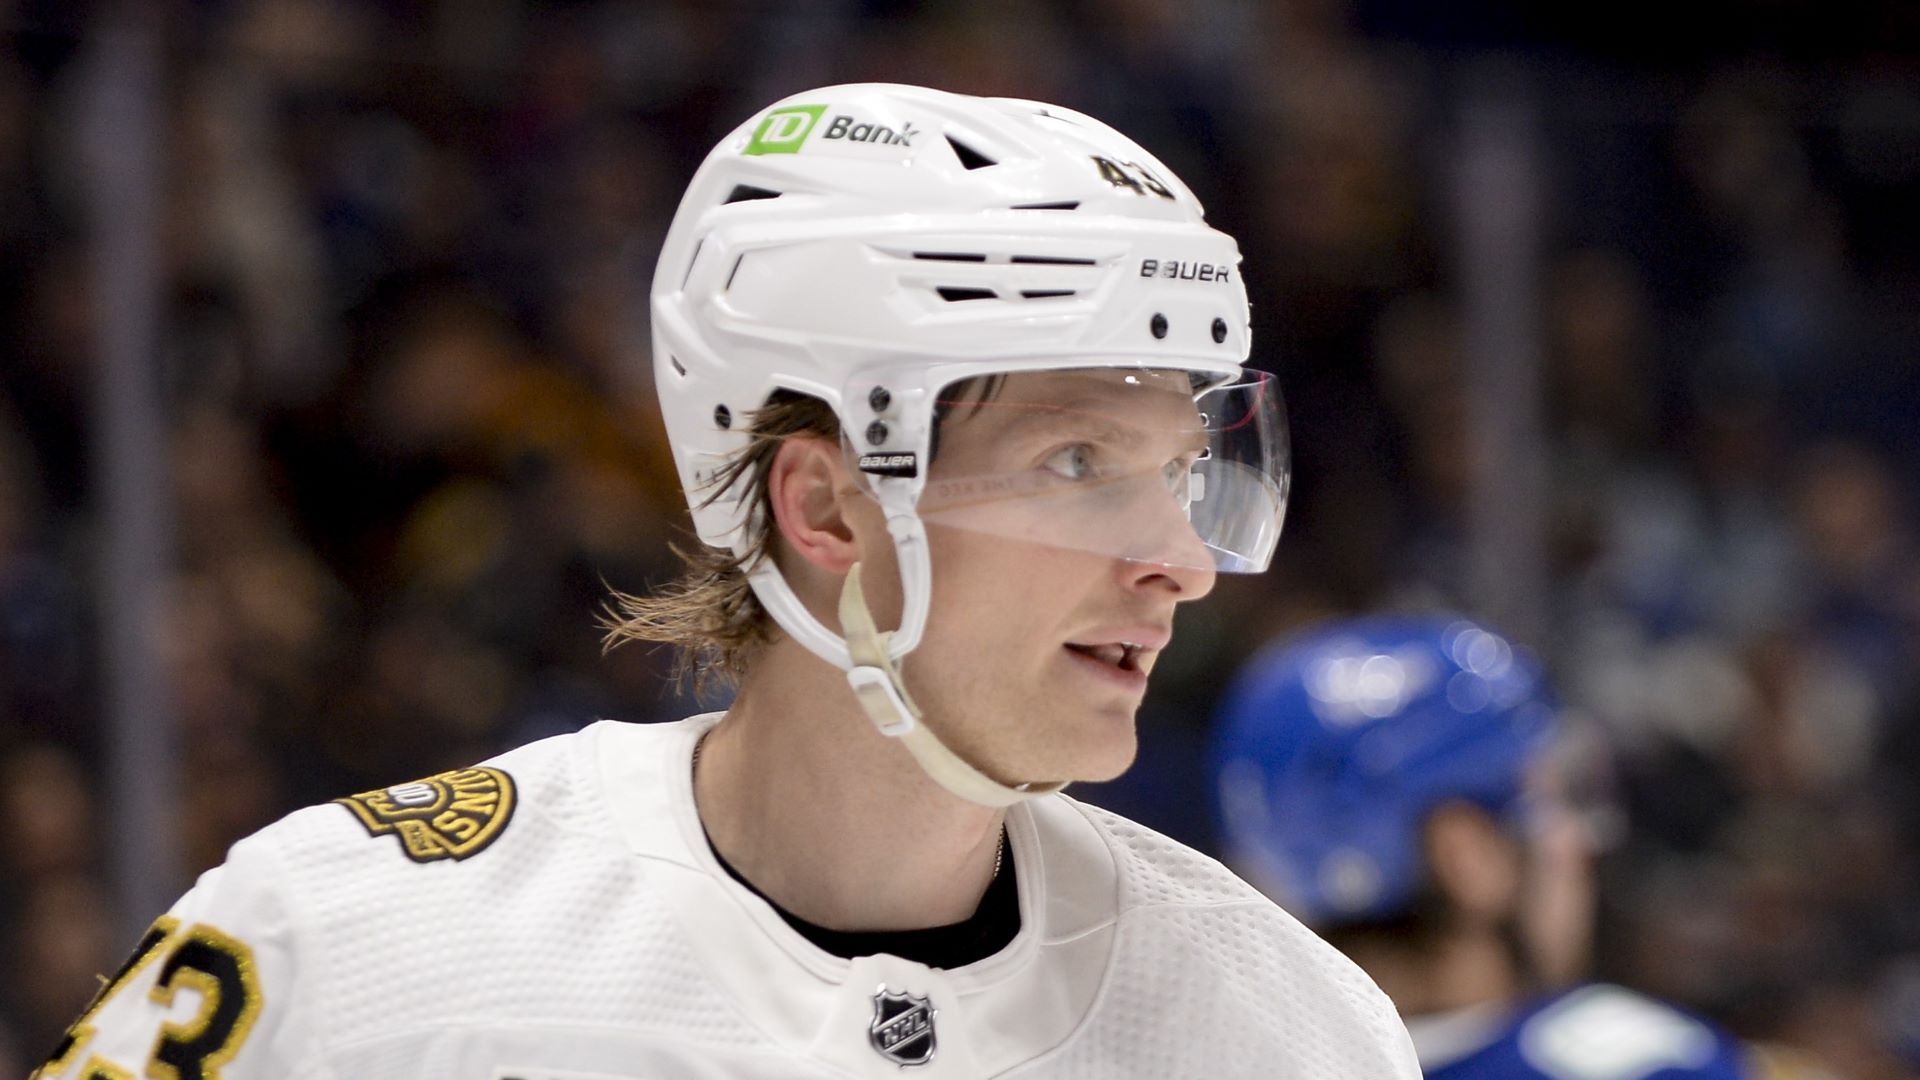 Where Bruins’ Danton Heinen Stands In Recovery From Playoff Injury